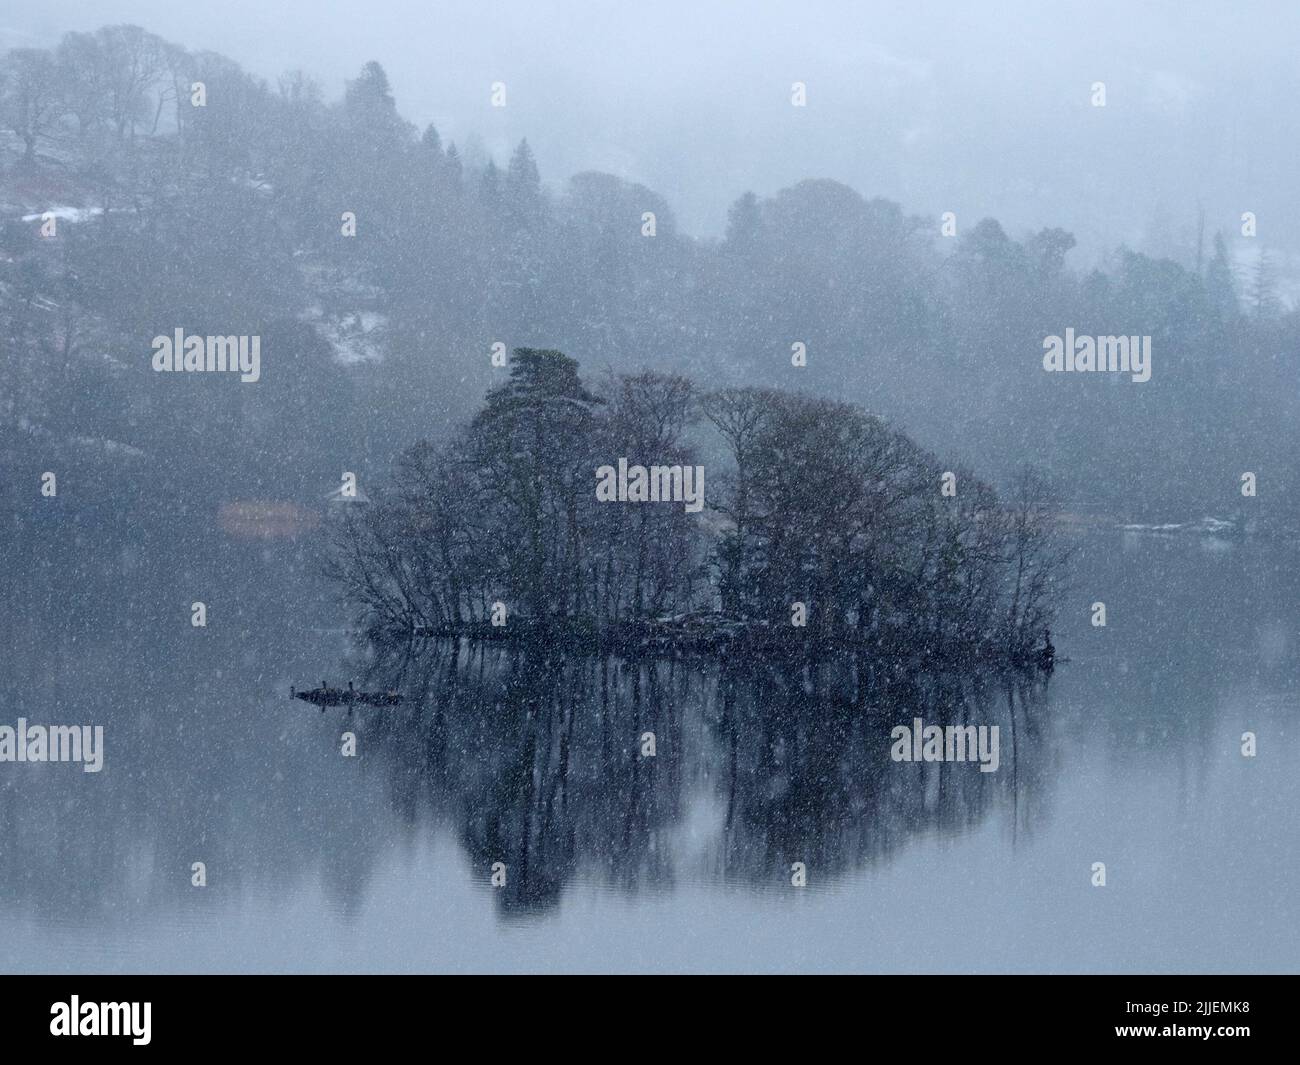 snow falling over bare trees reflected in still wintry waters of Rydal Water near Grasmere,Cumbria,England, UK Stock Photo